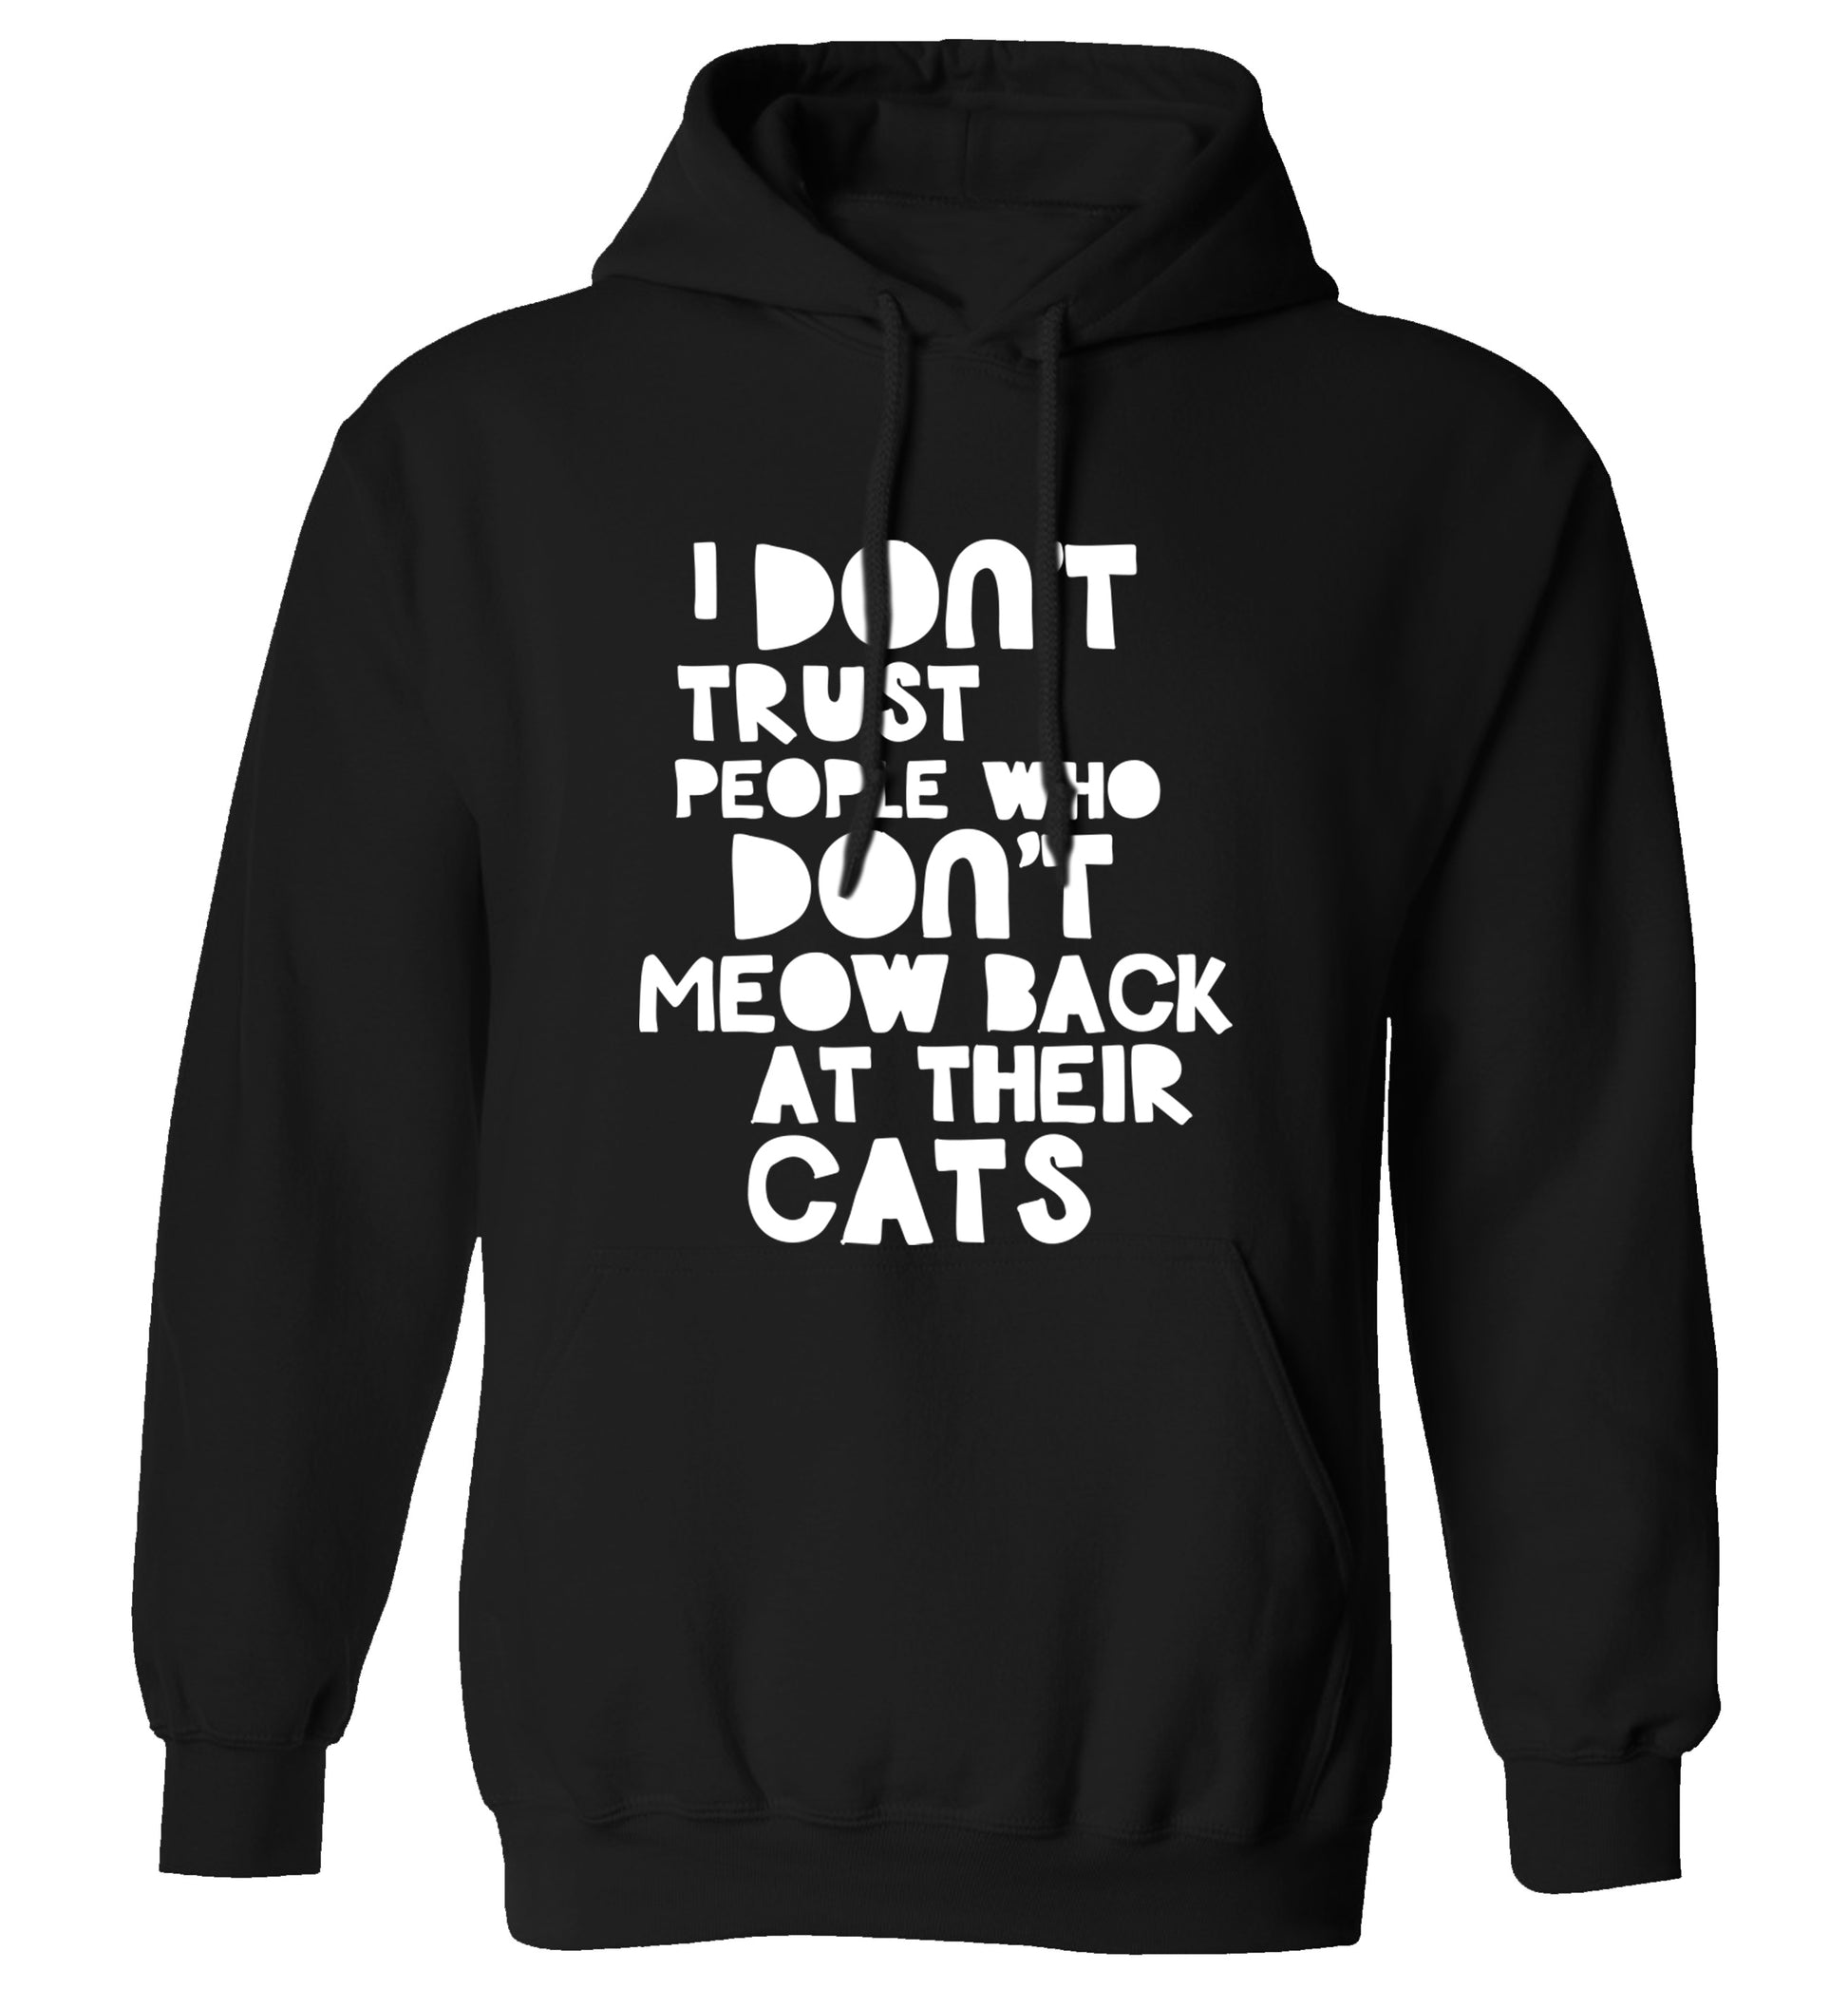 I don't trust people who don't meow back at their cats adults unisex black hoodie 2XL